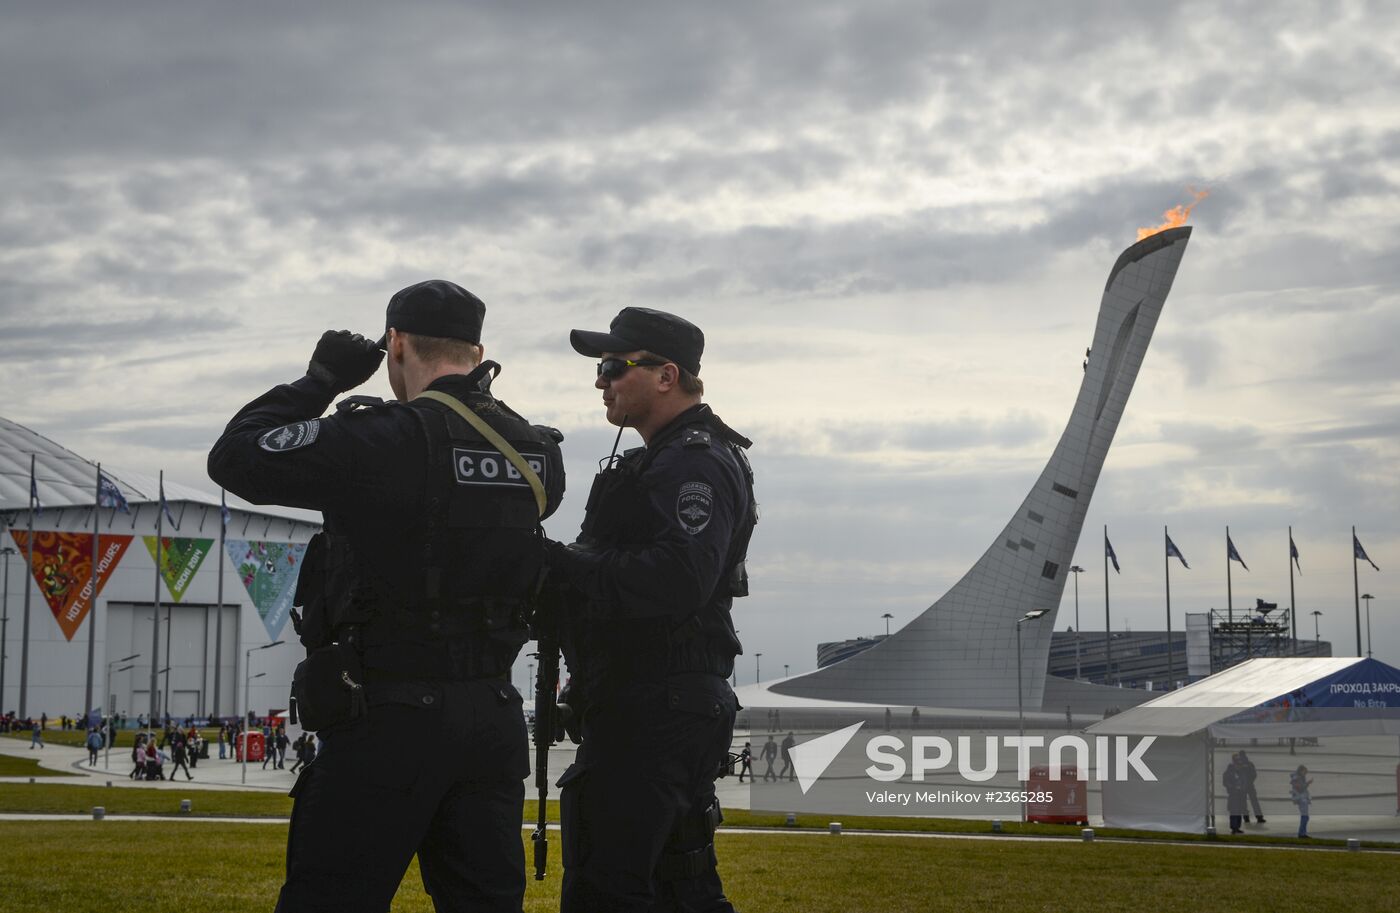 Olympic Park's security ensured